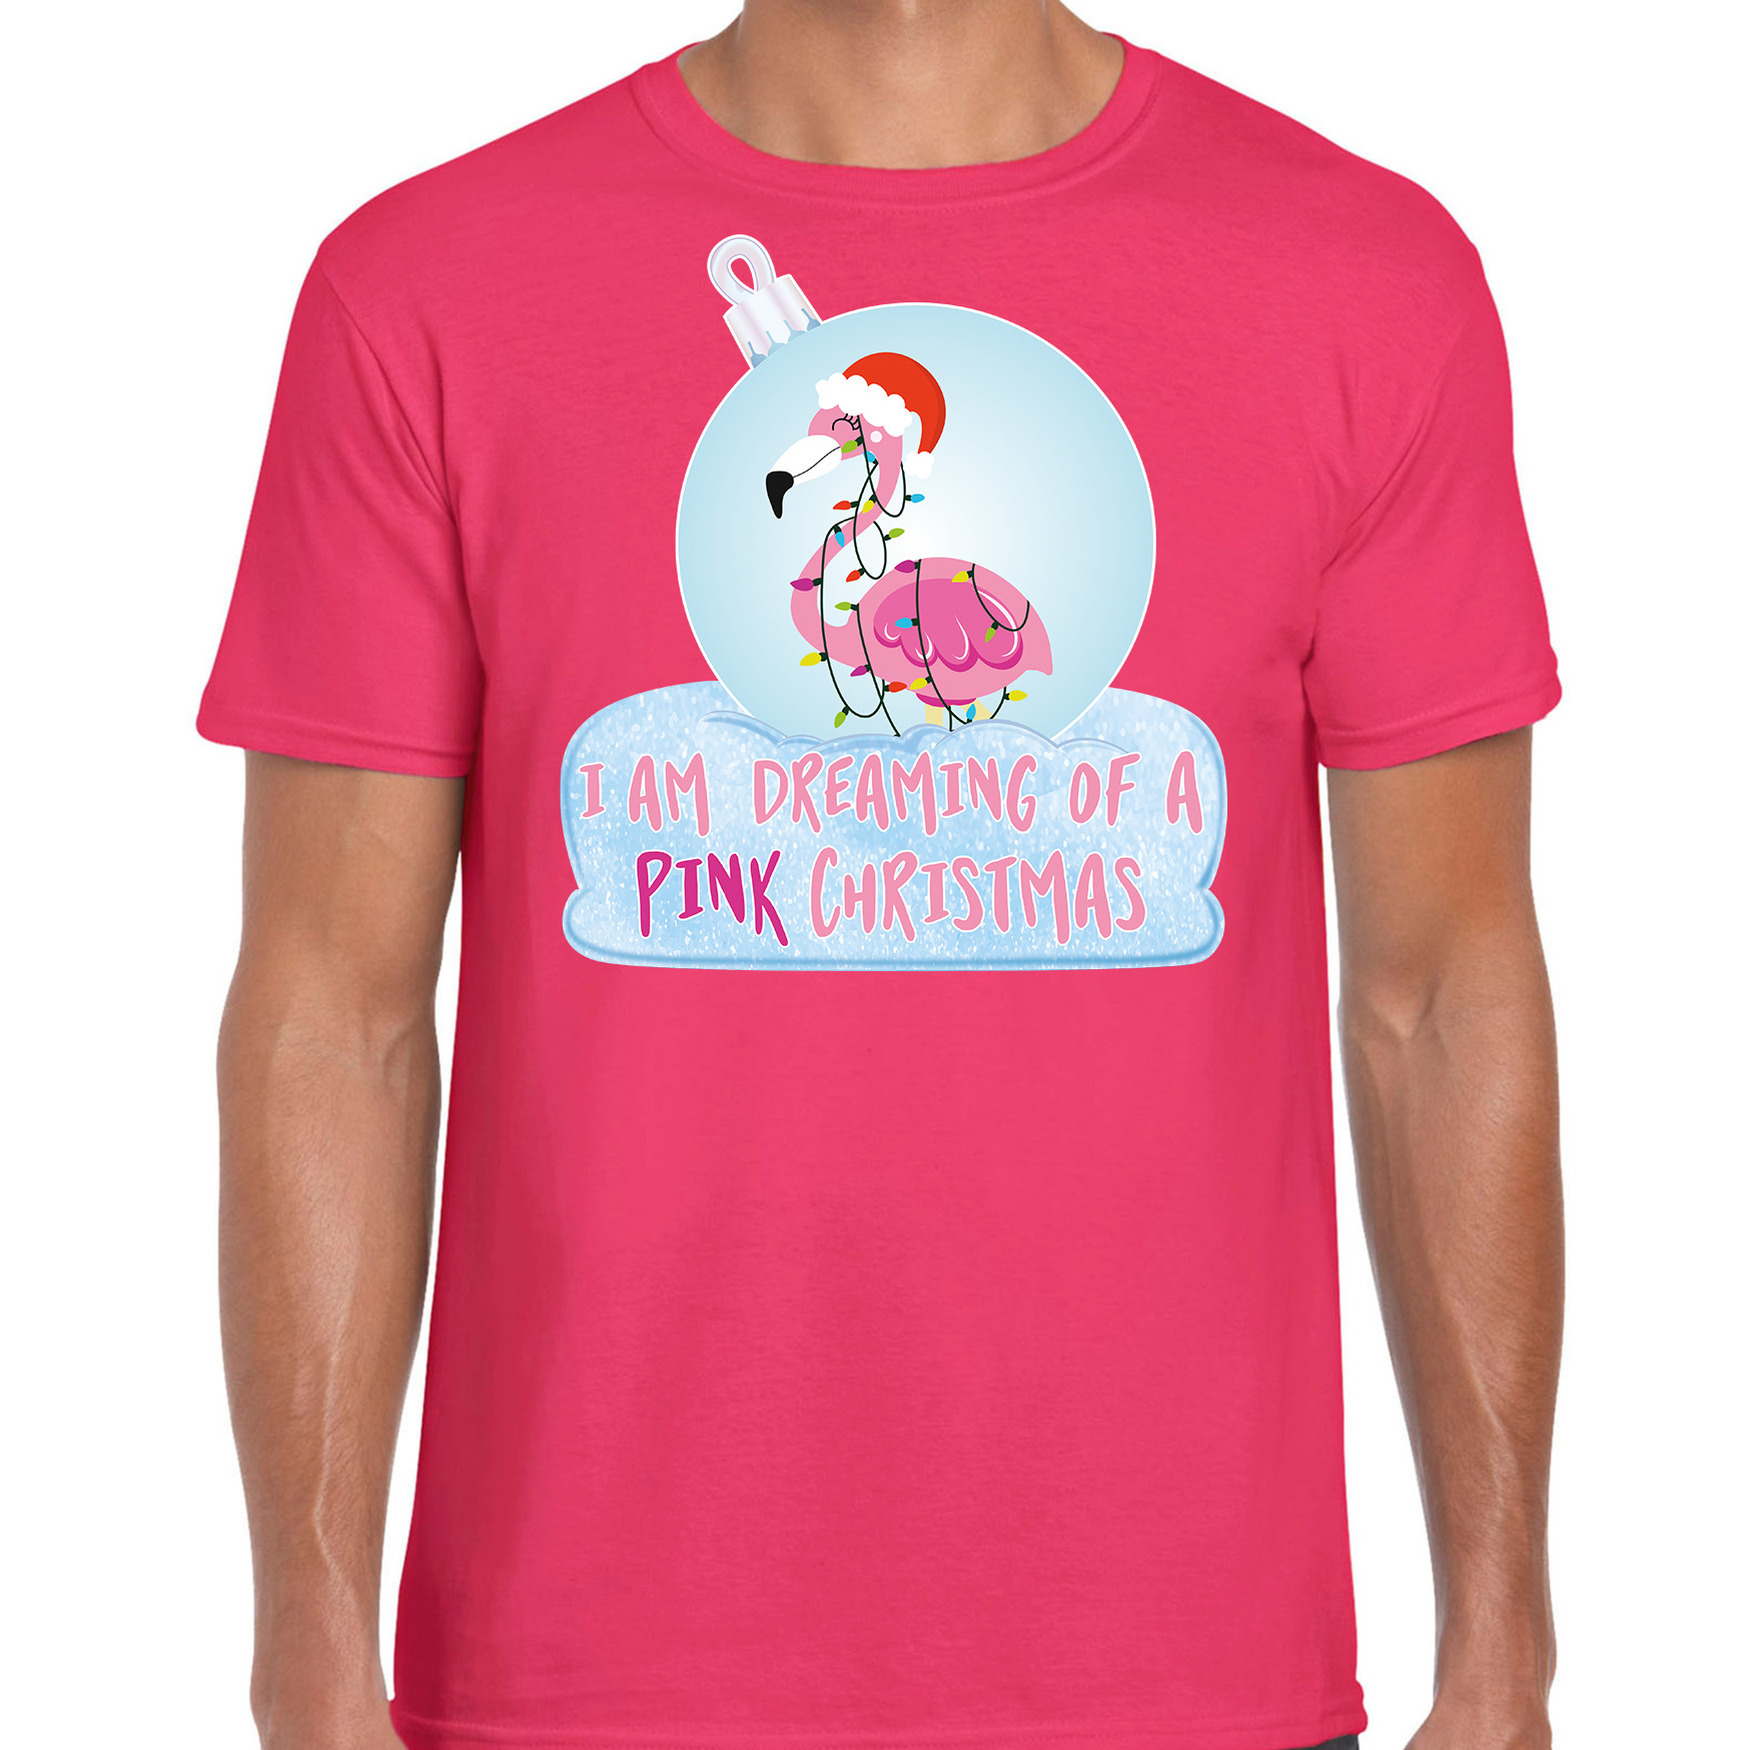 Flamingo Kerstbal shirt-Kerst outfit I am dreaming of a pink Christmas roze voor heren